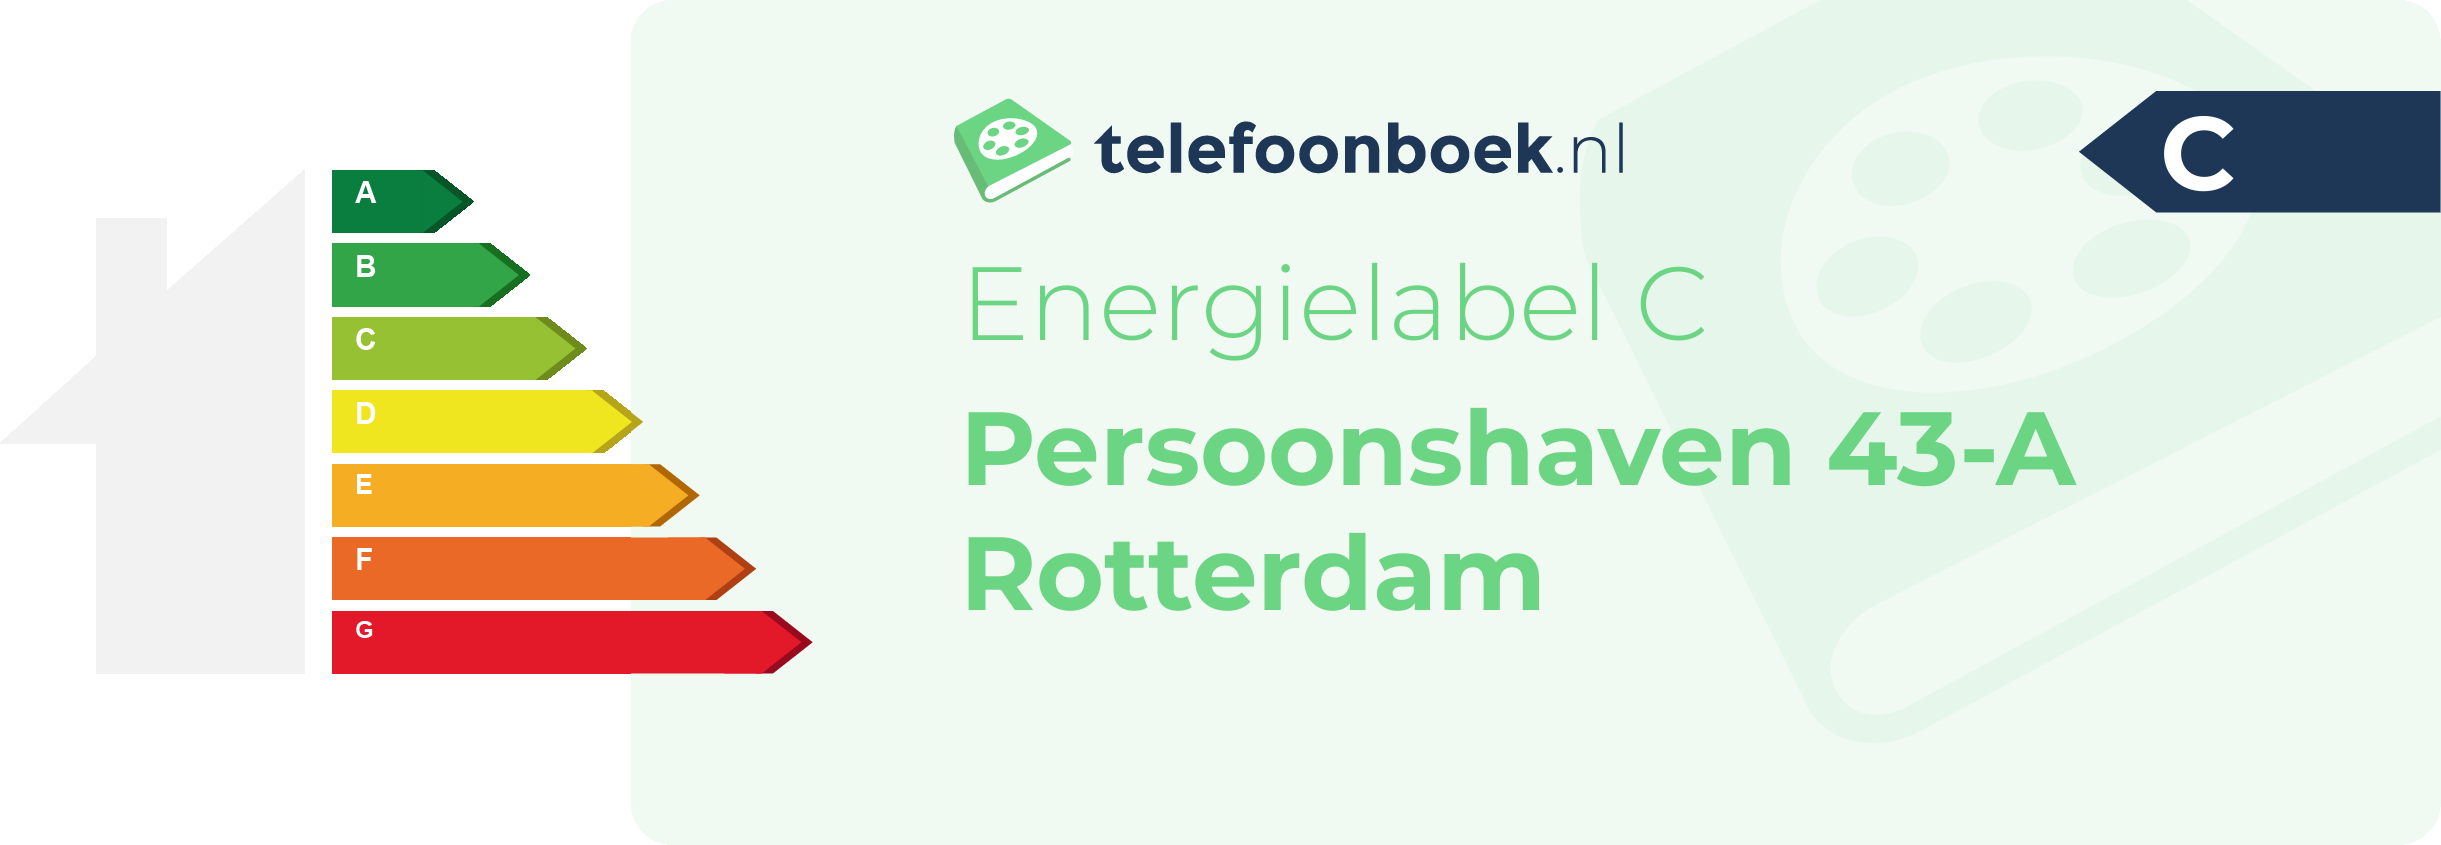 Energielabel Persoonshaven 43-A Rotterdam